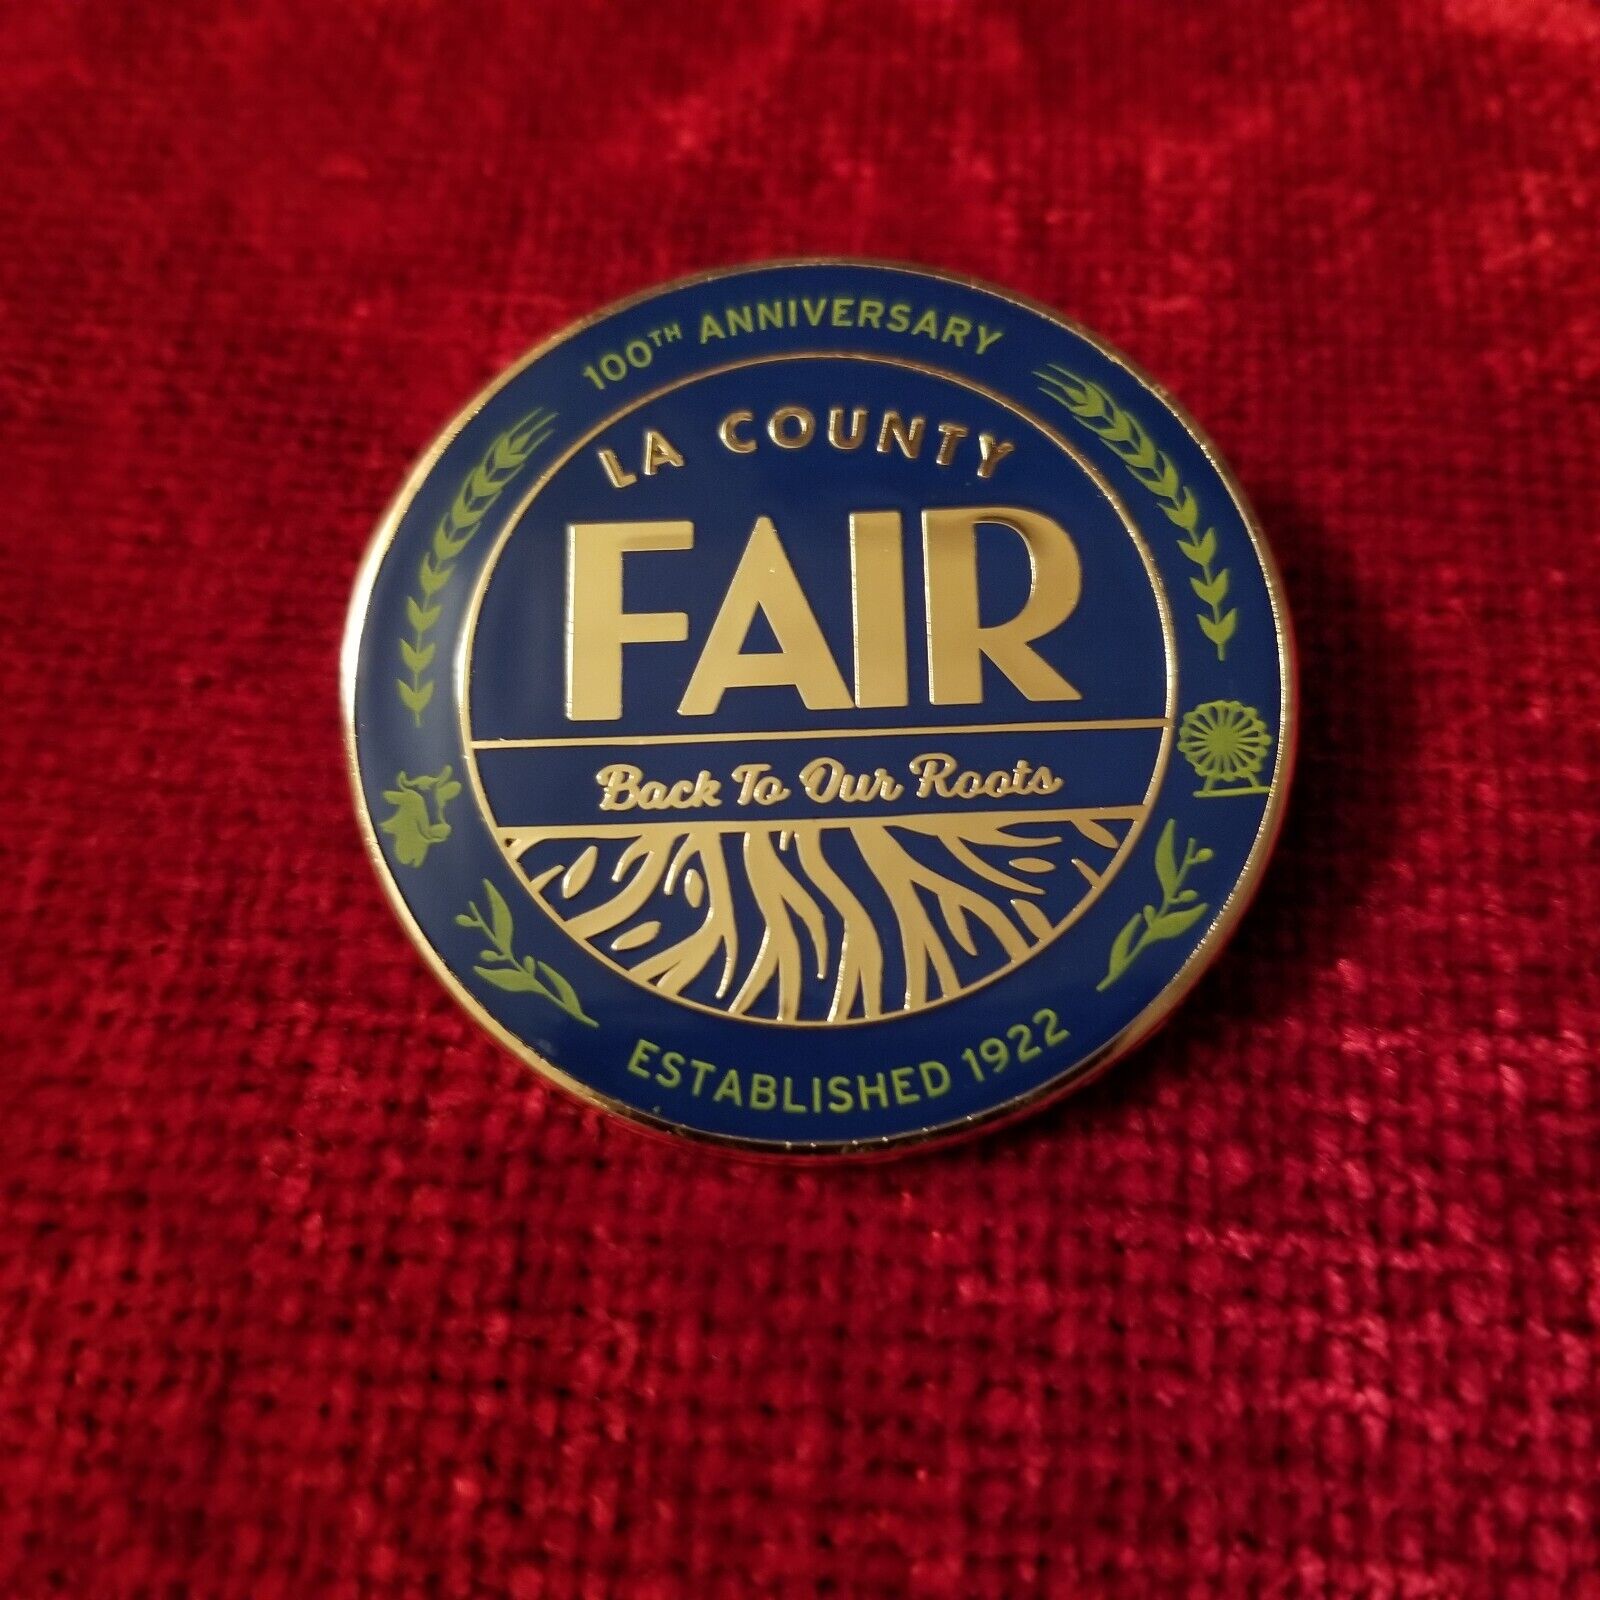 LA Los Angeles County Fair Pin 100th Anniversary Back To Our Roots 1922 - 2022